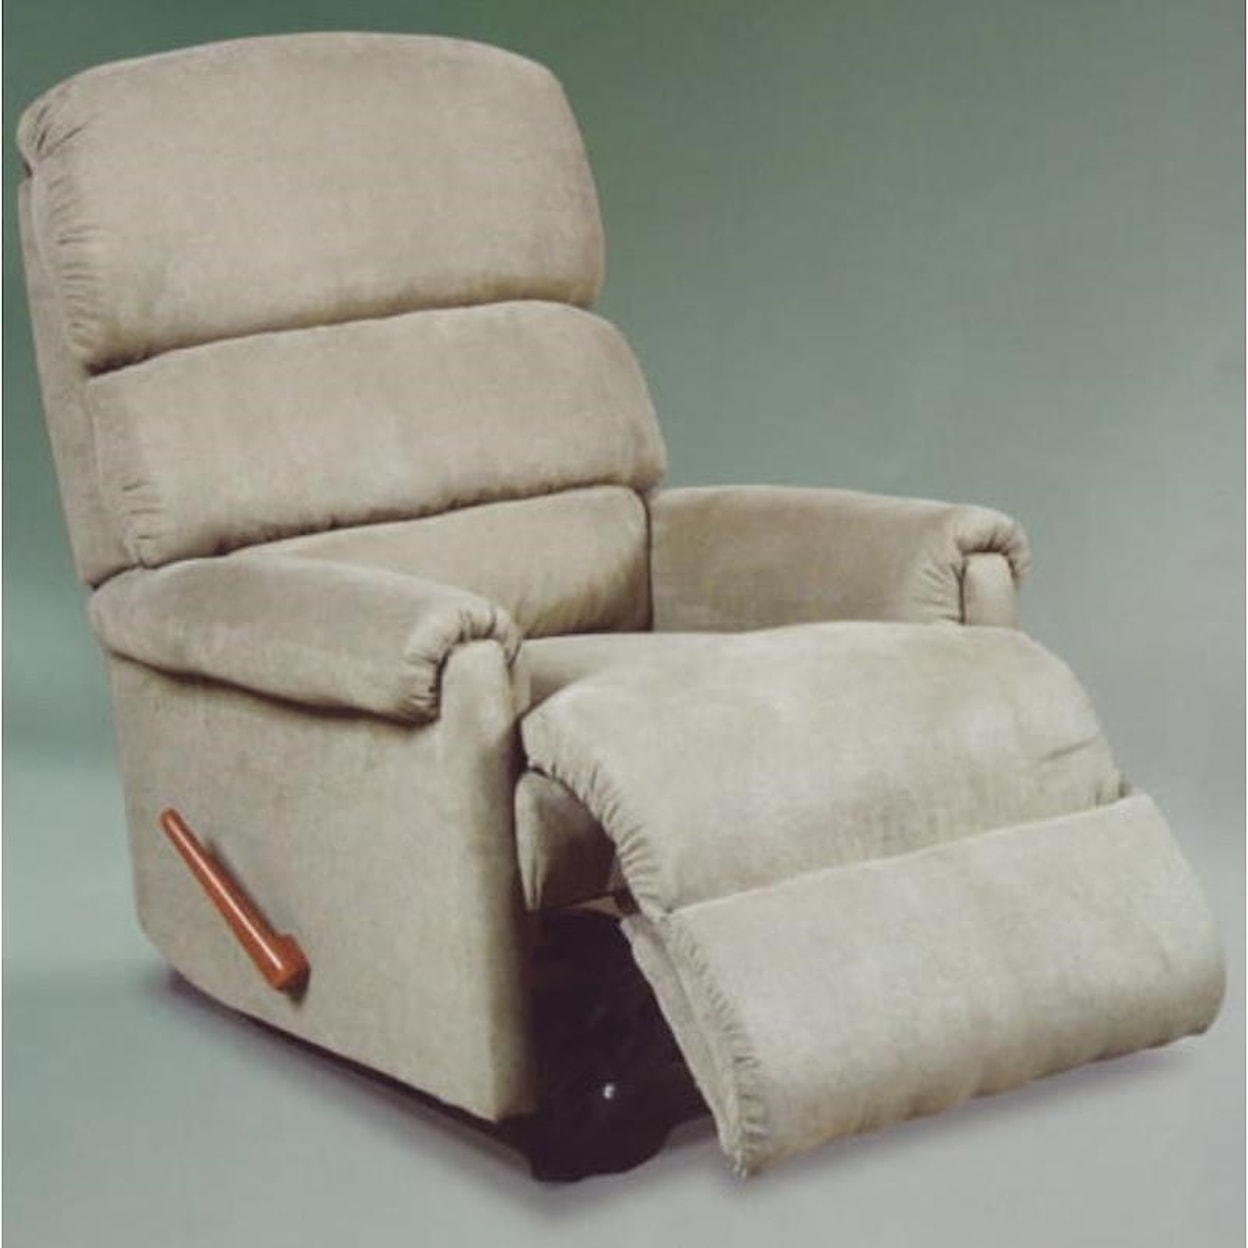 Ort Manufacturing Handle Recliner Chaise Rocker Recliner